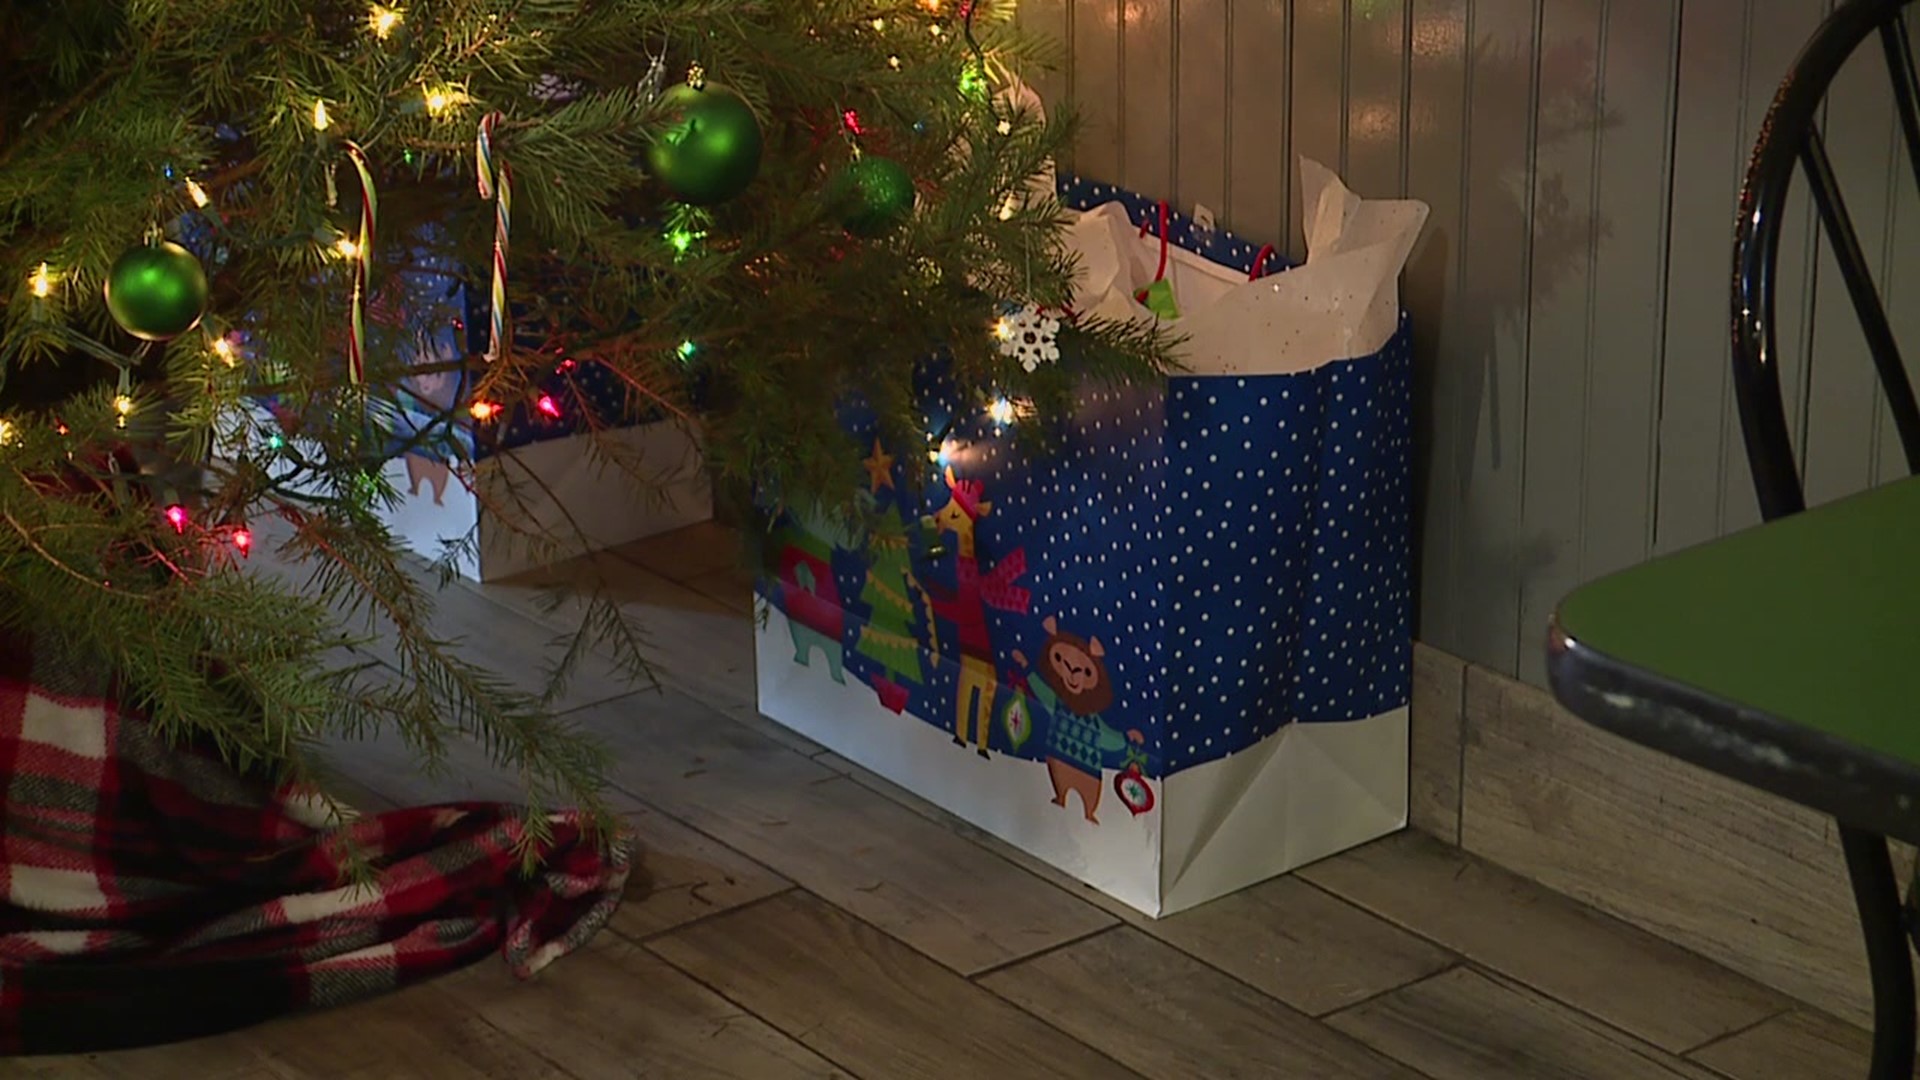 Christmas gifts will be given out at Woody's Alehouse and Grille to 25 underprivileged kids.